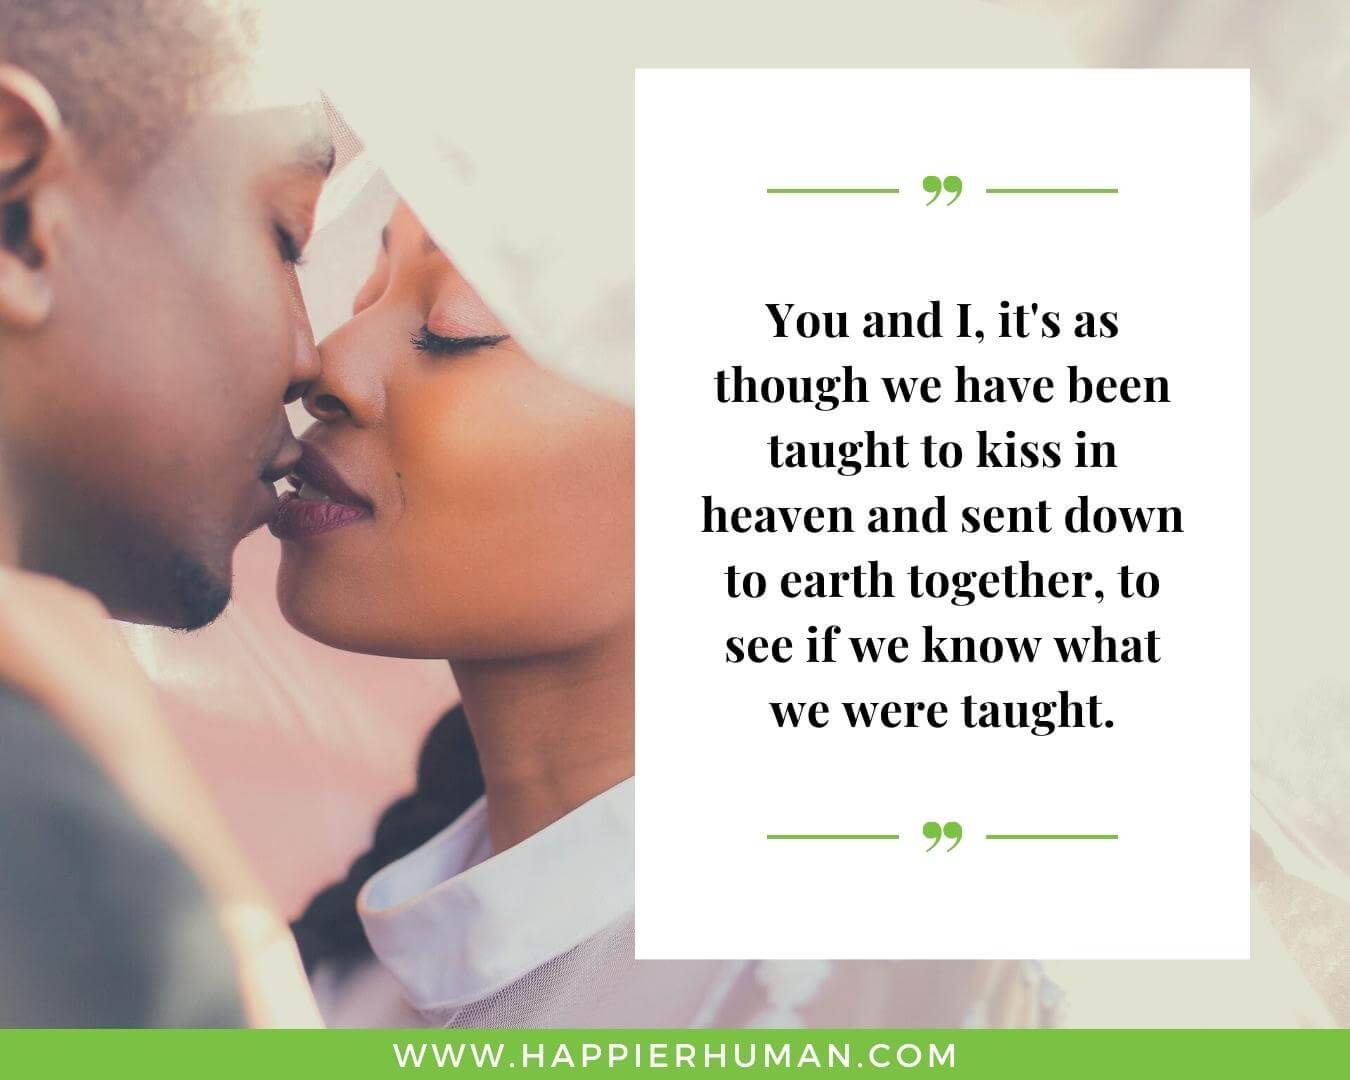 Real love quotes for girlfriend - “You and I, it's as though we have been taught to kiss in heaven and sent down to earth together, to see if we know what we were taught.”